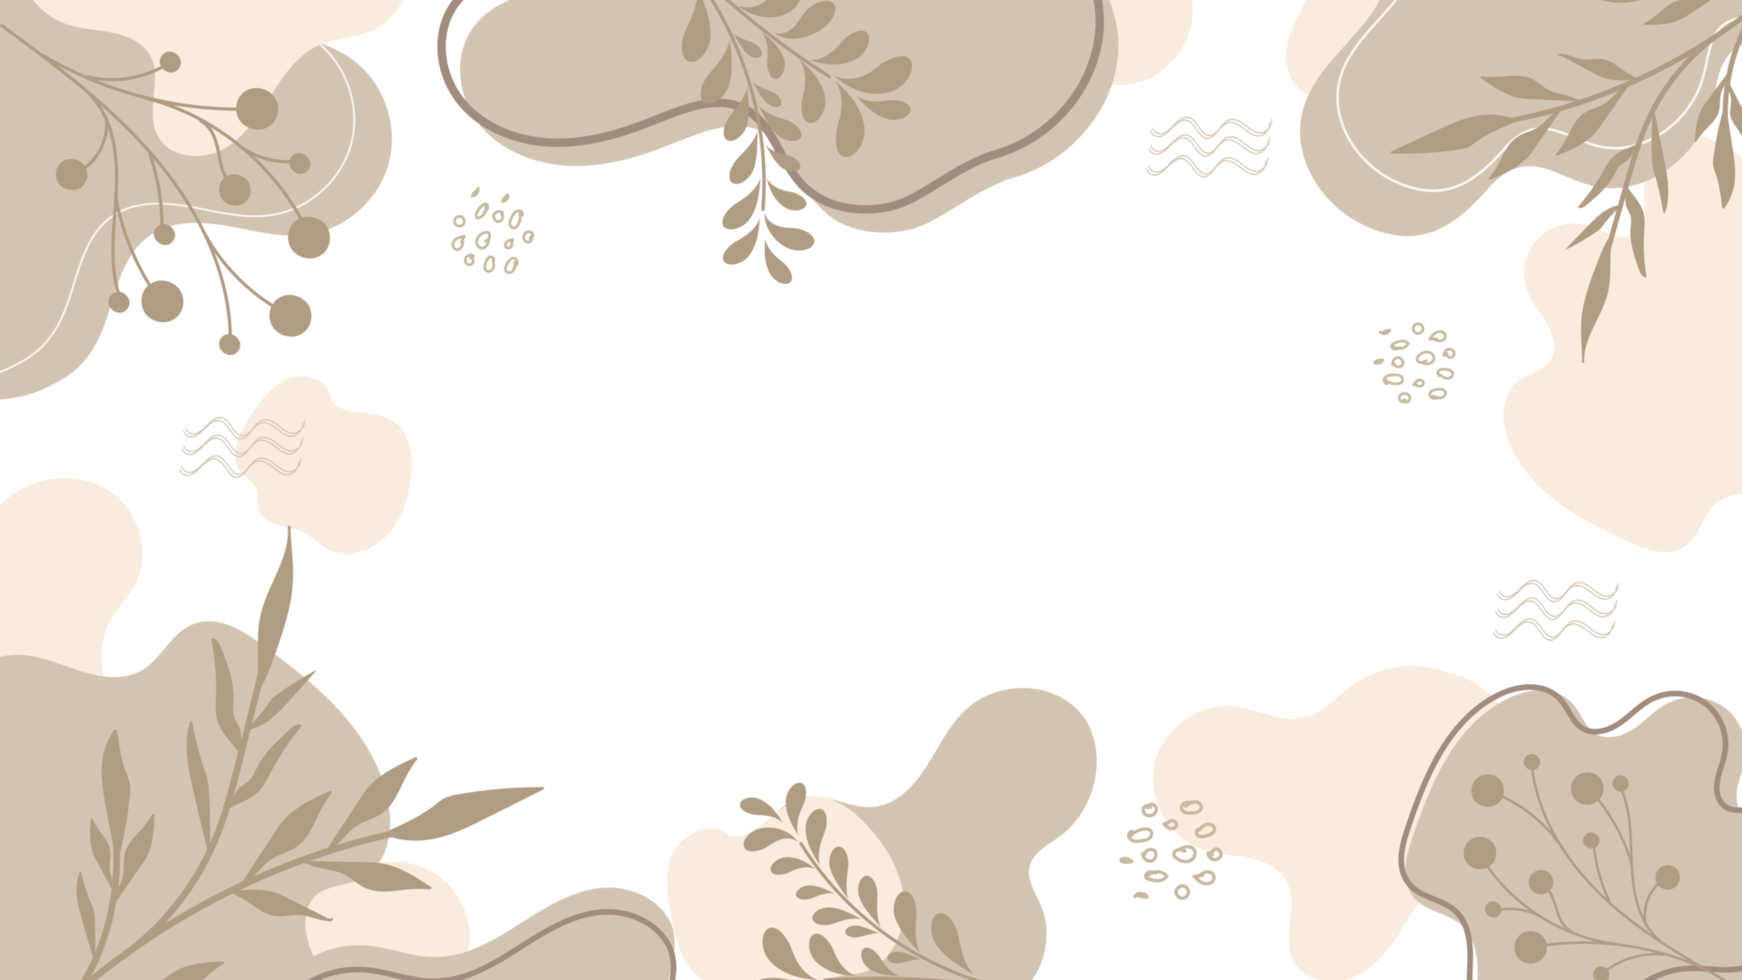 Aesthetic Flower PNG Image HD